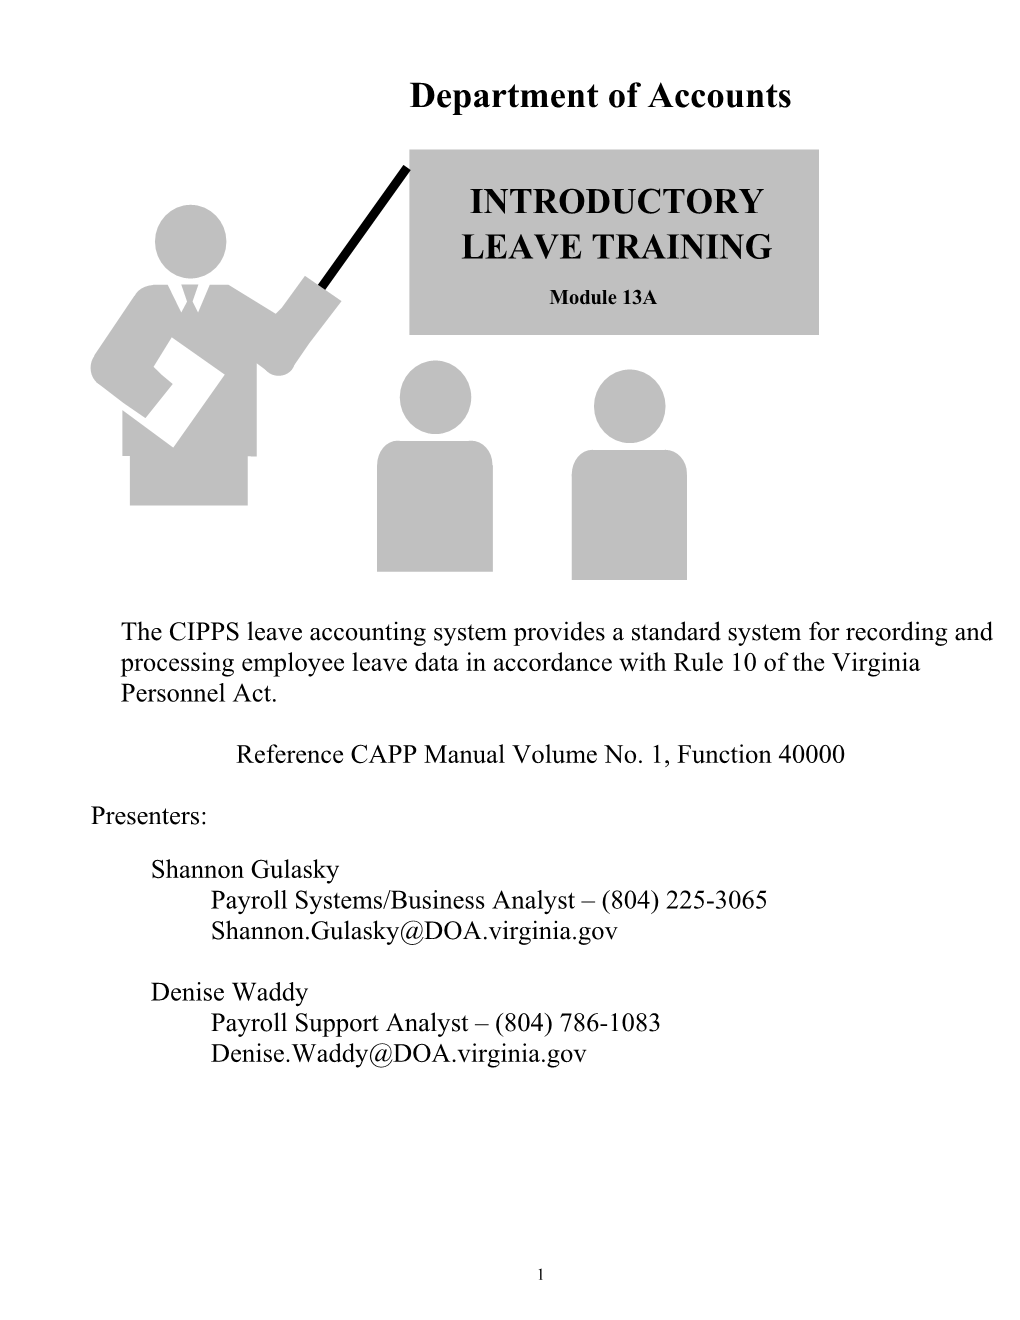 Beginners Cipps Leave Training